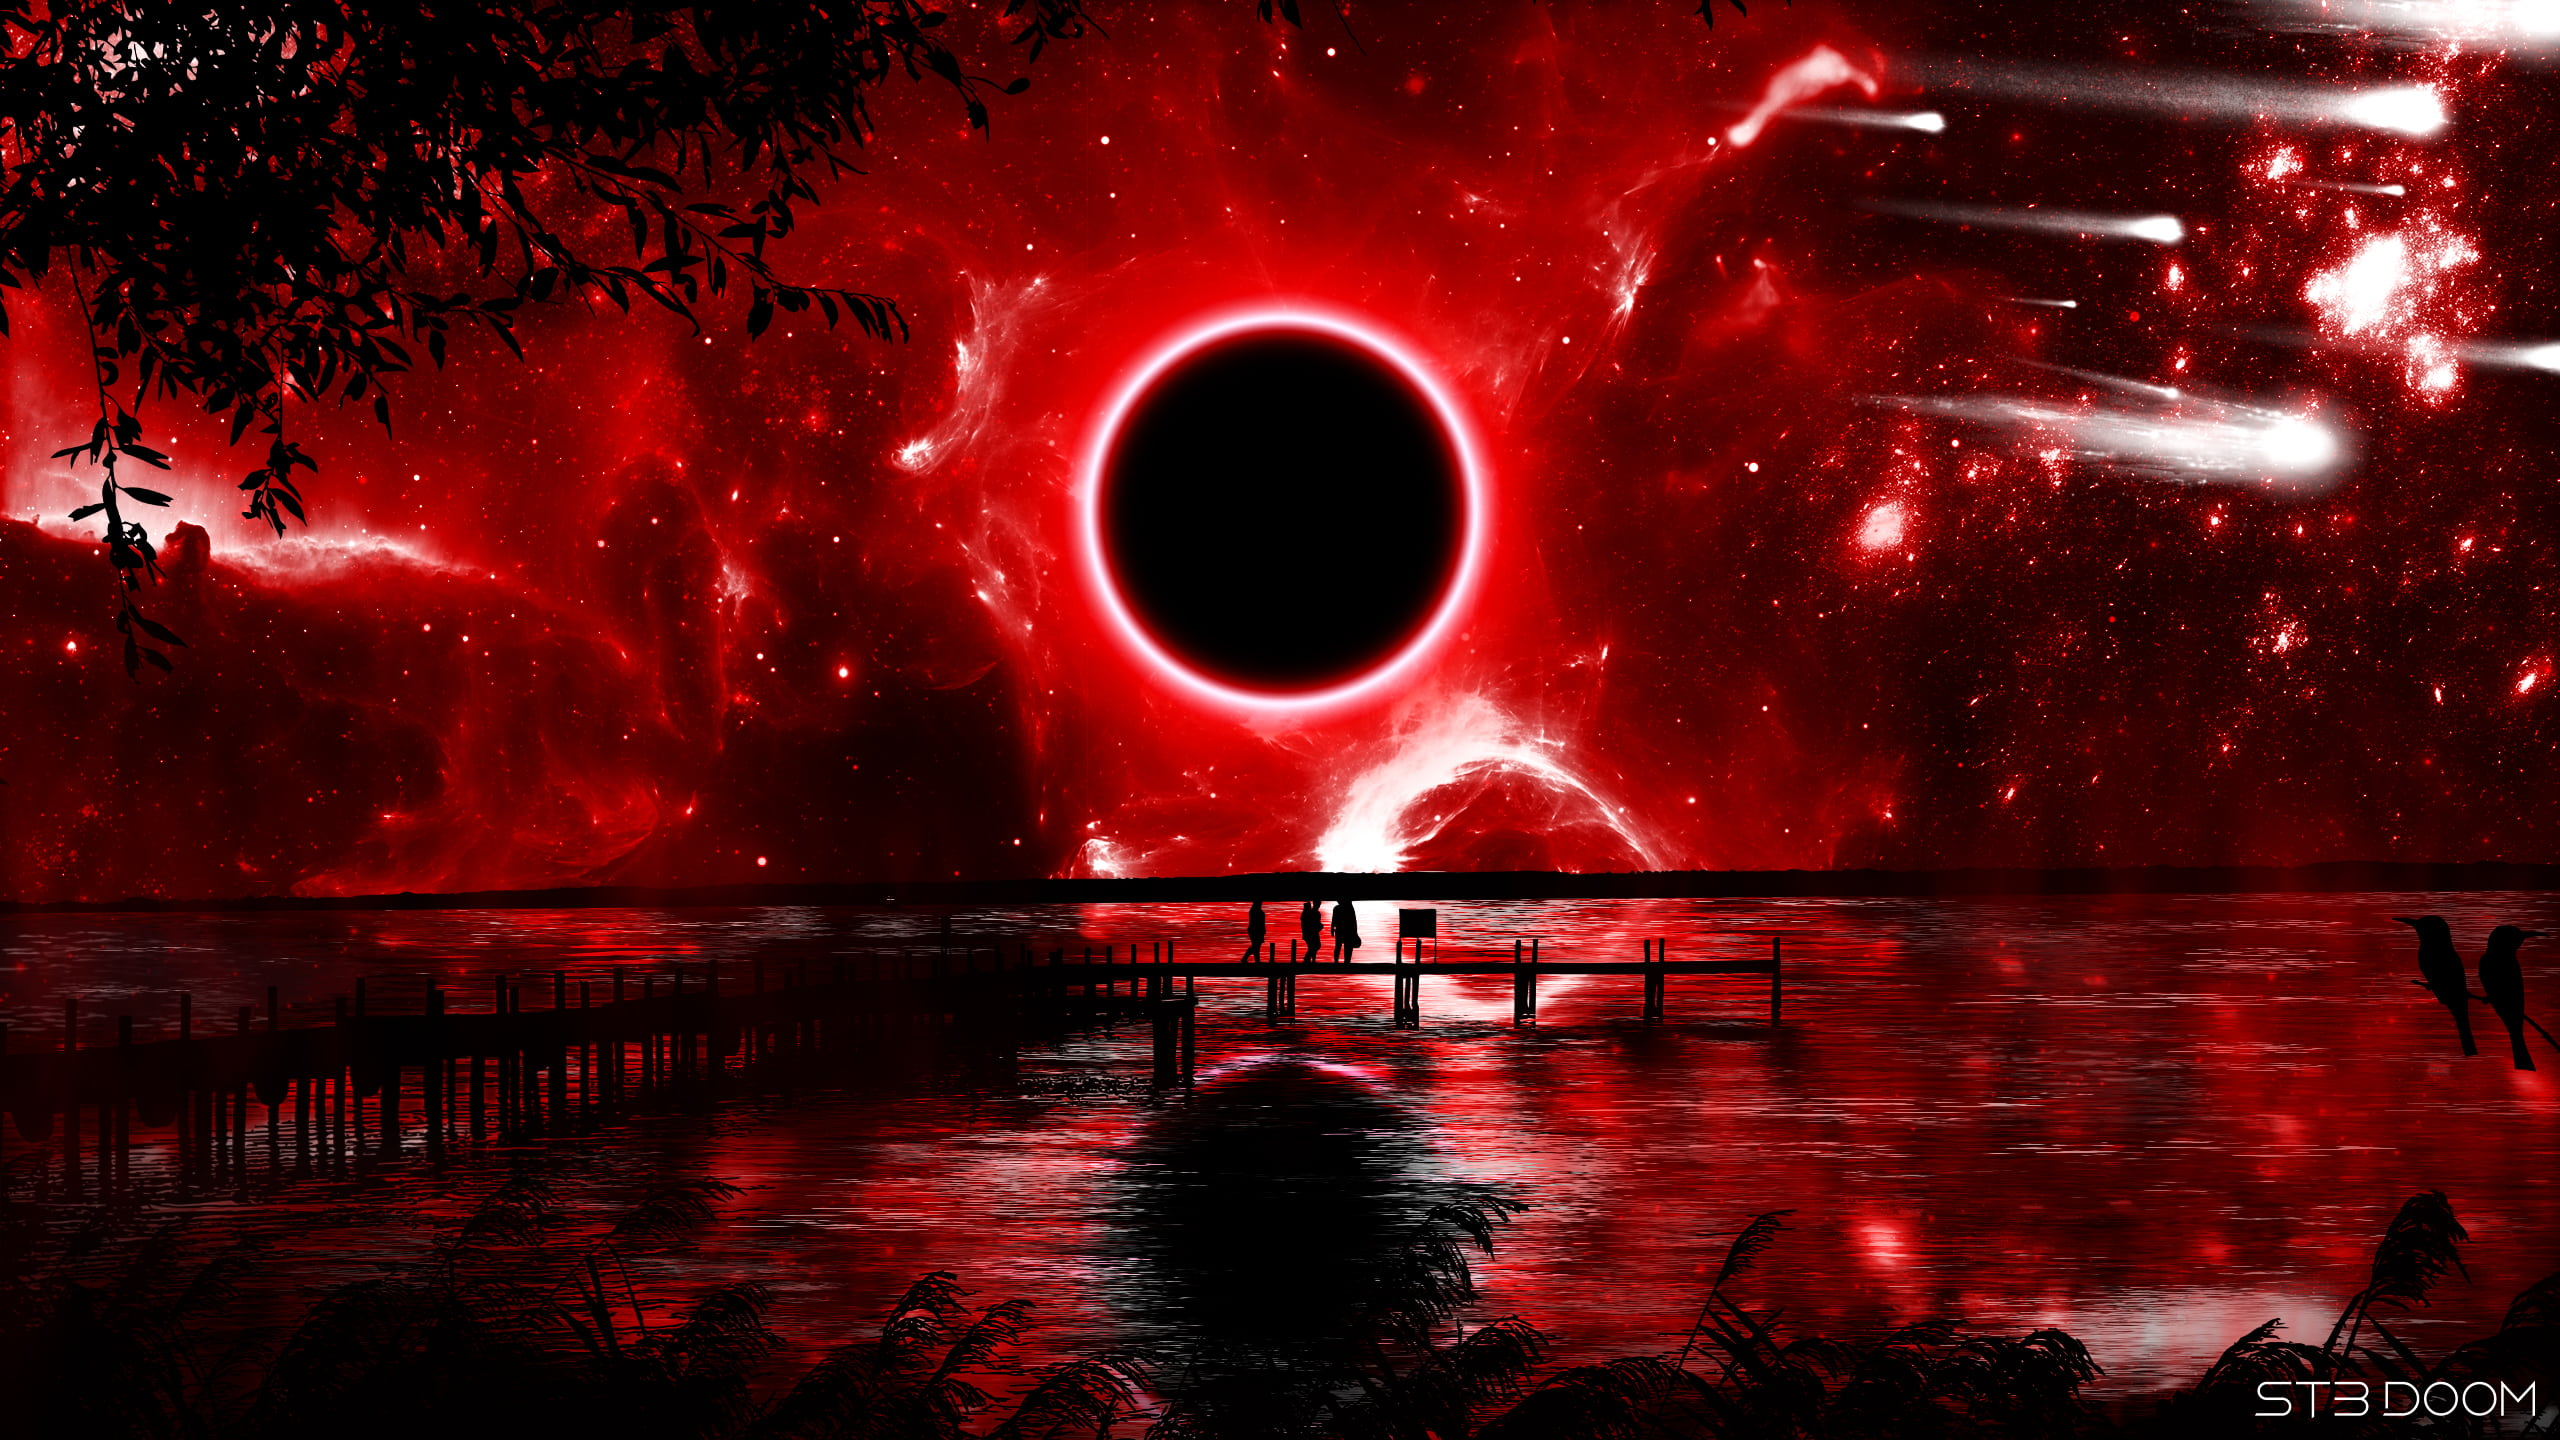 General 2560x1440 red black eclipse  bridge water reflection sky trees branch leaves space stars nebula shooting stars birds shadow